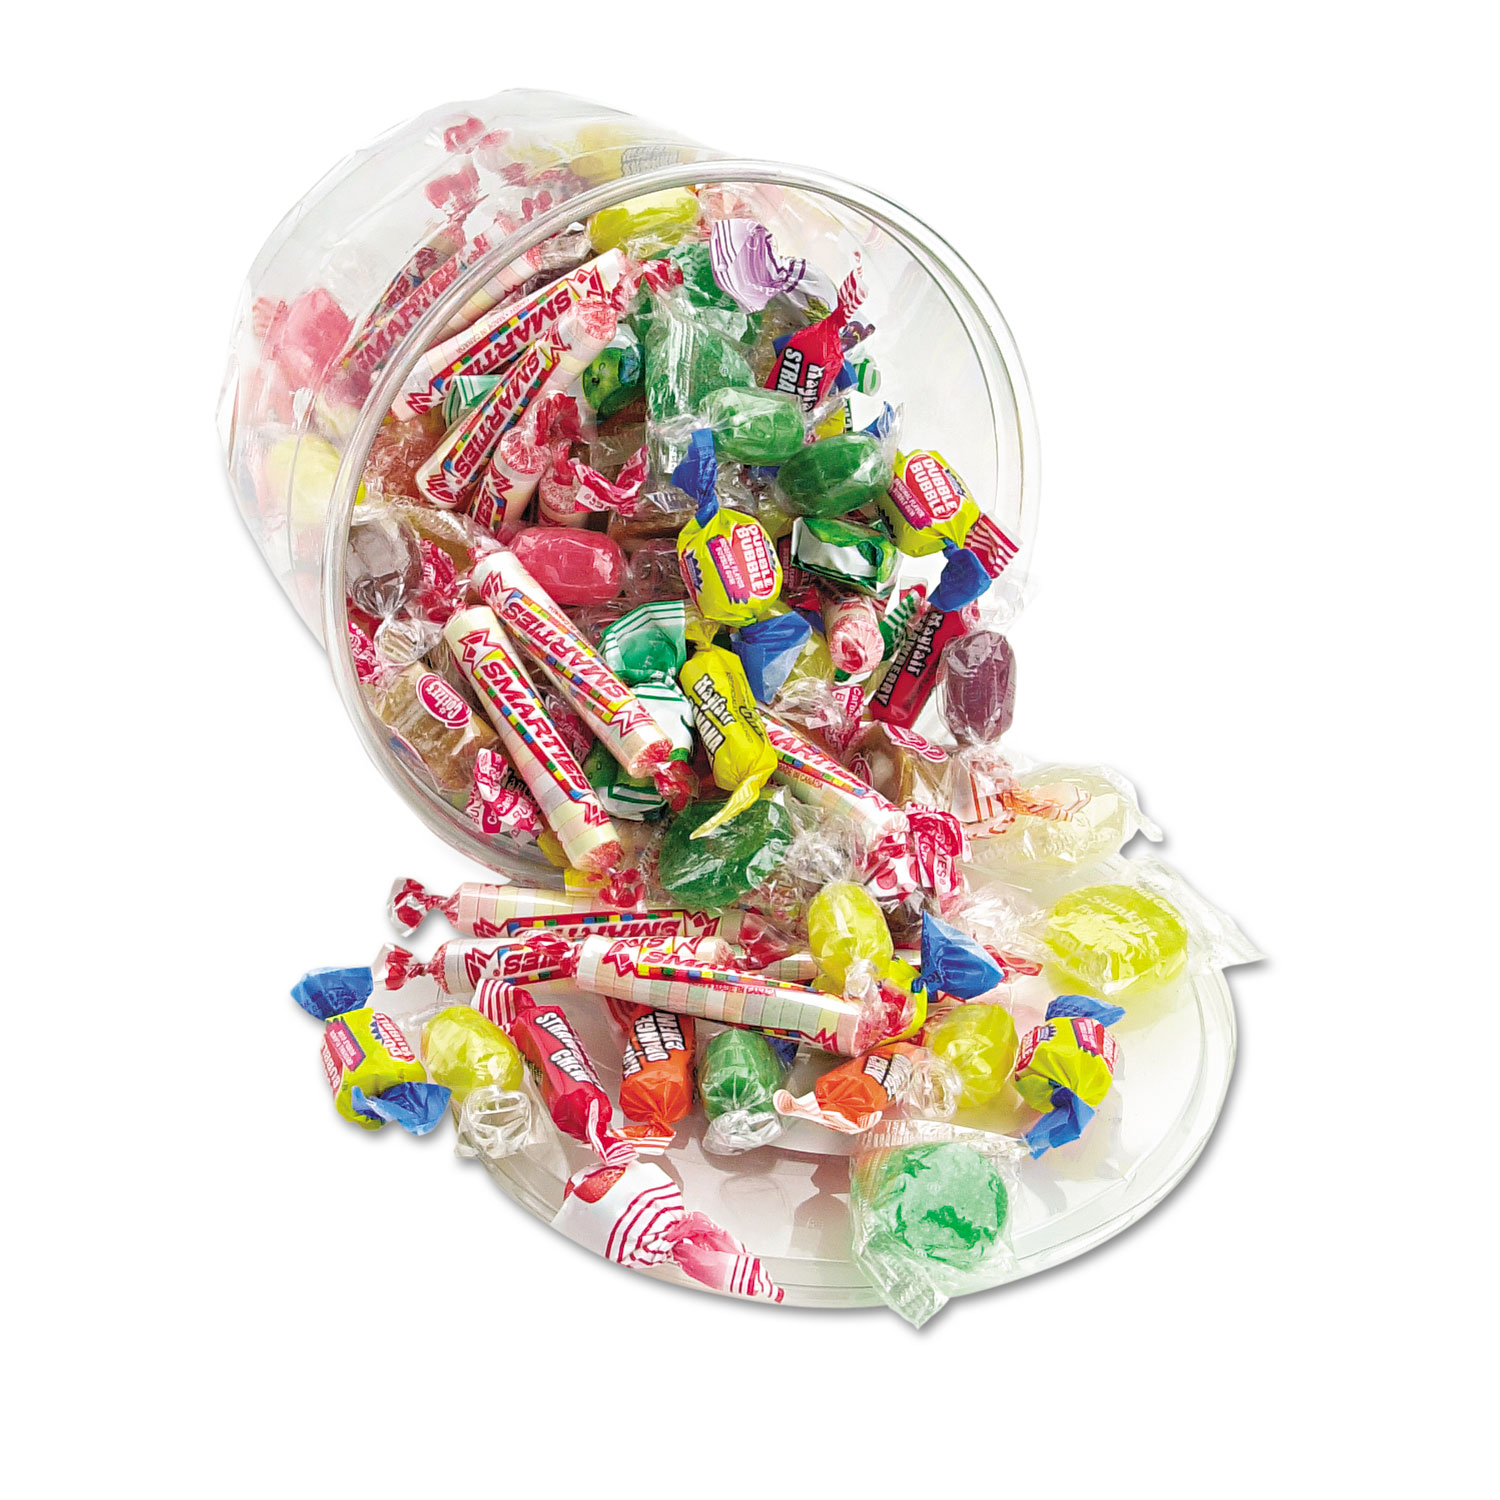  Office Snax 00002 All Tyme Favorite Assorted Candies and Gum, 2 lb Resealable Plastic Tub (OFX00002) 